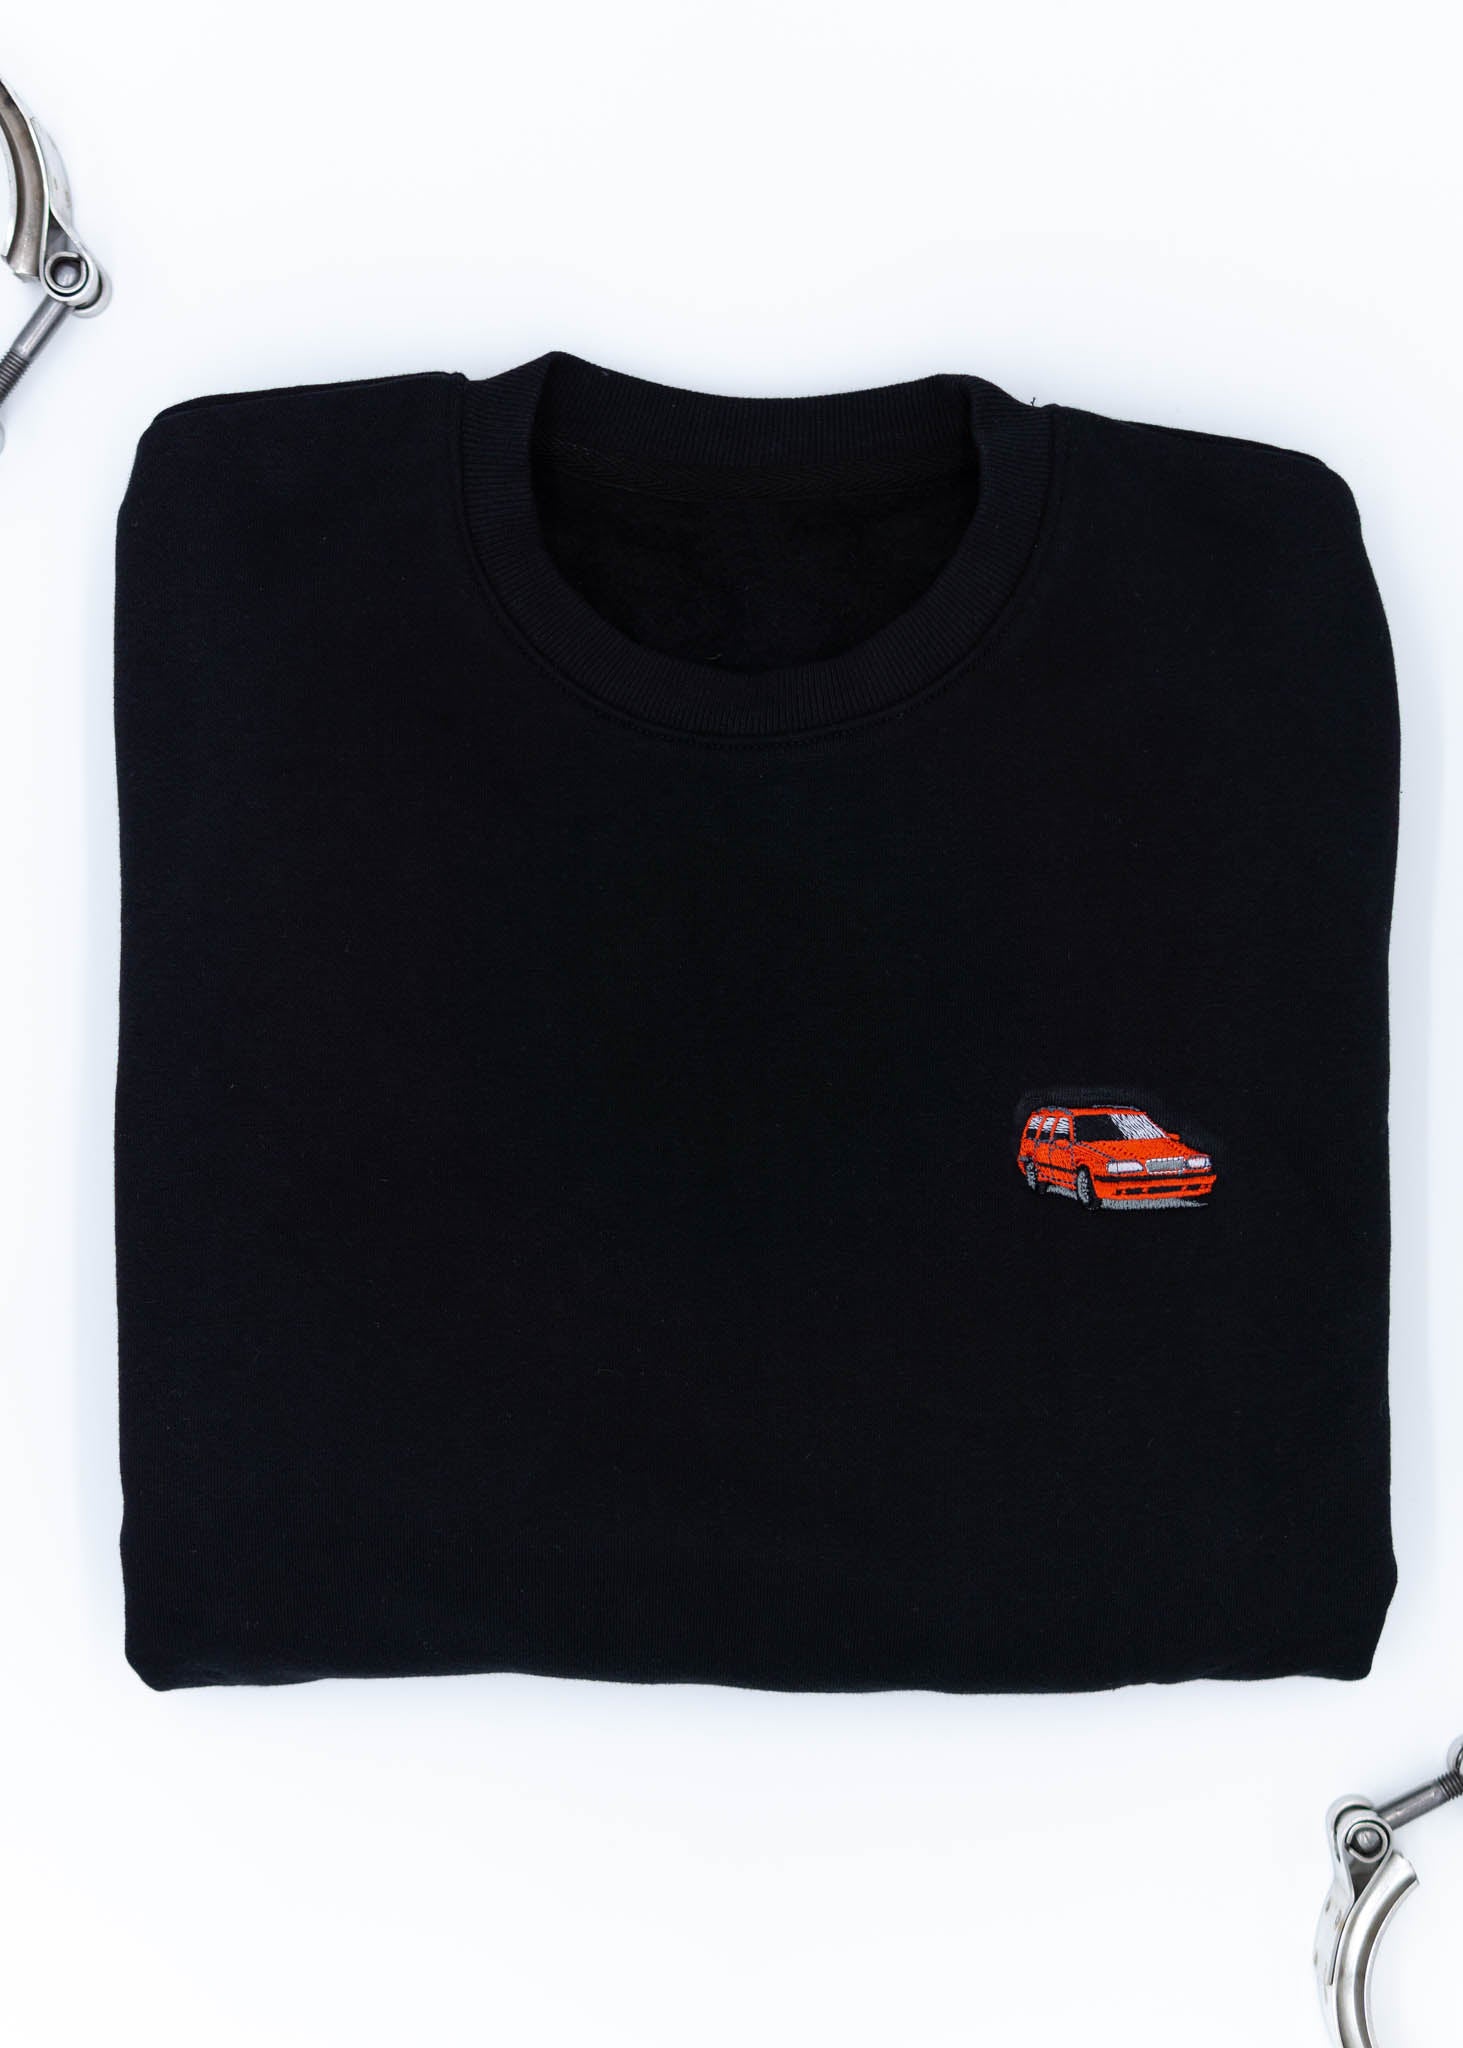 A black Volvo crewneck sweater for men. Photo is a close up of the sweater with an embroidered 850R. Fabric is composed of high quality 80% cotton, and 20% polyester and fits to size. The style is long sleeve, crew neck, and embroidery on left chest.